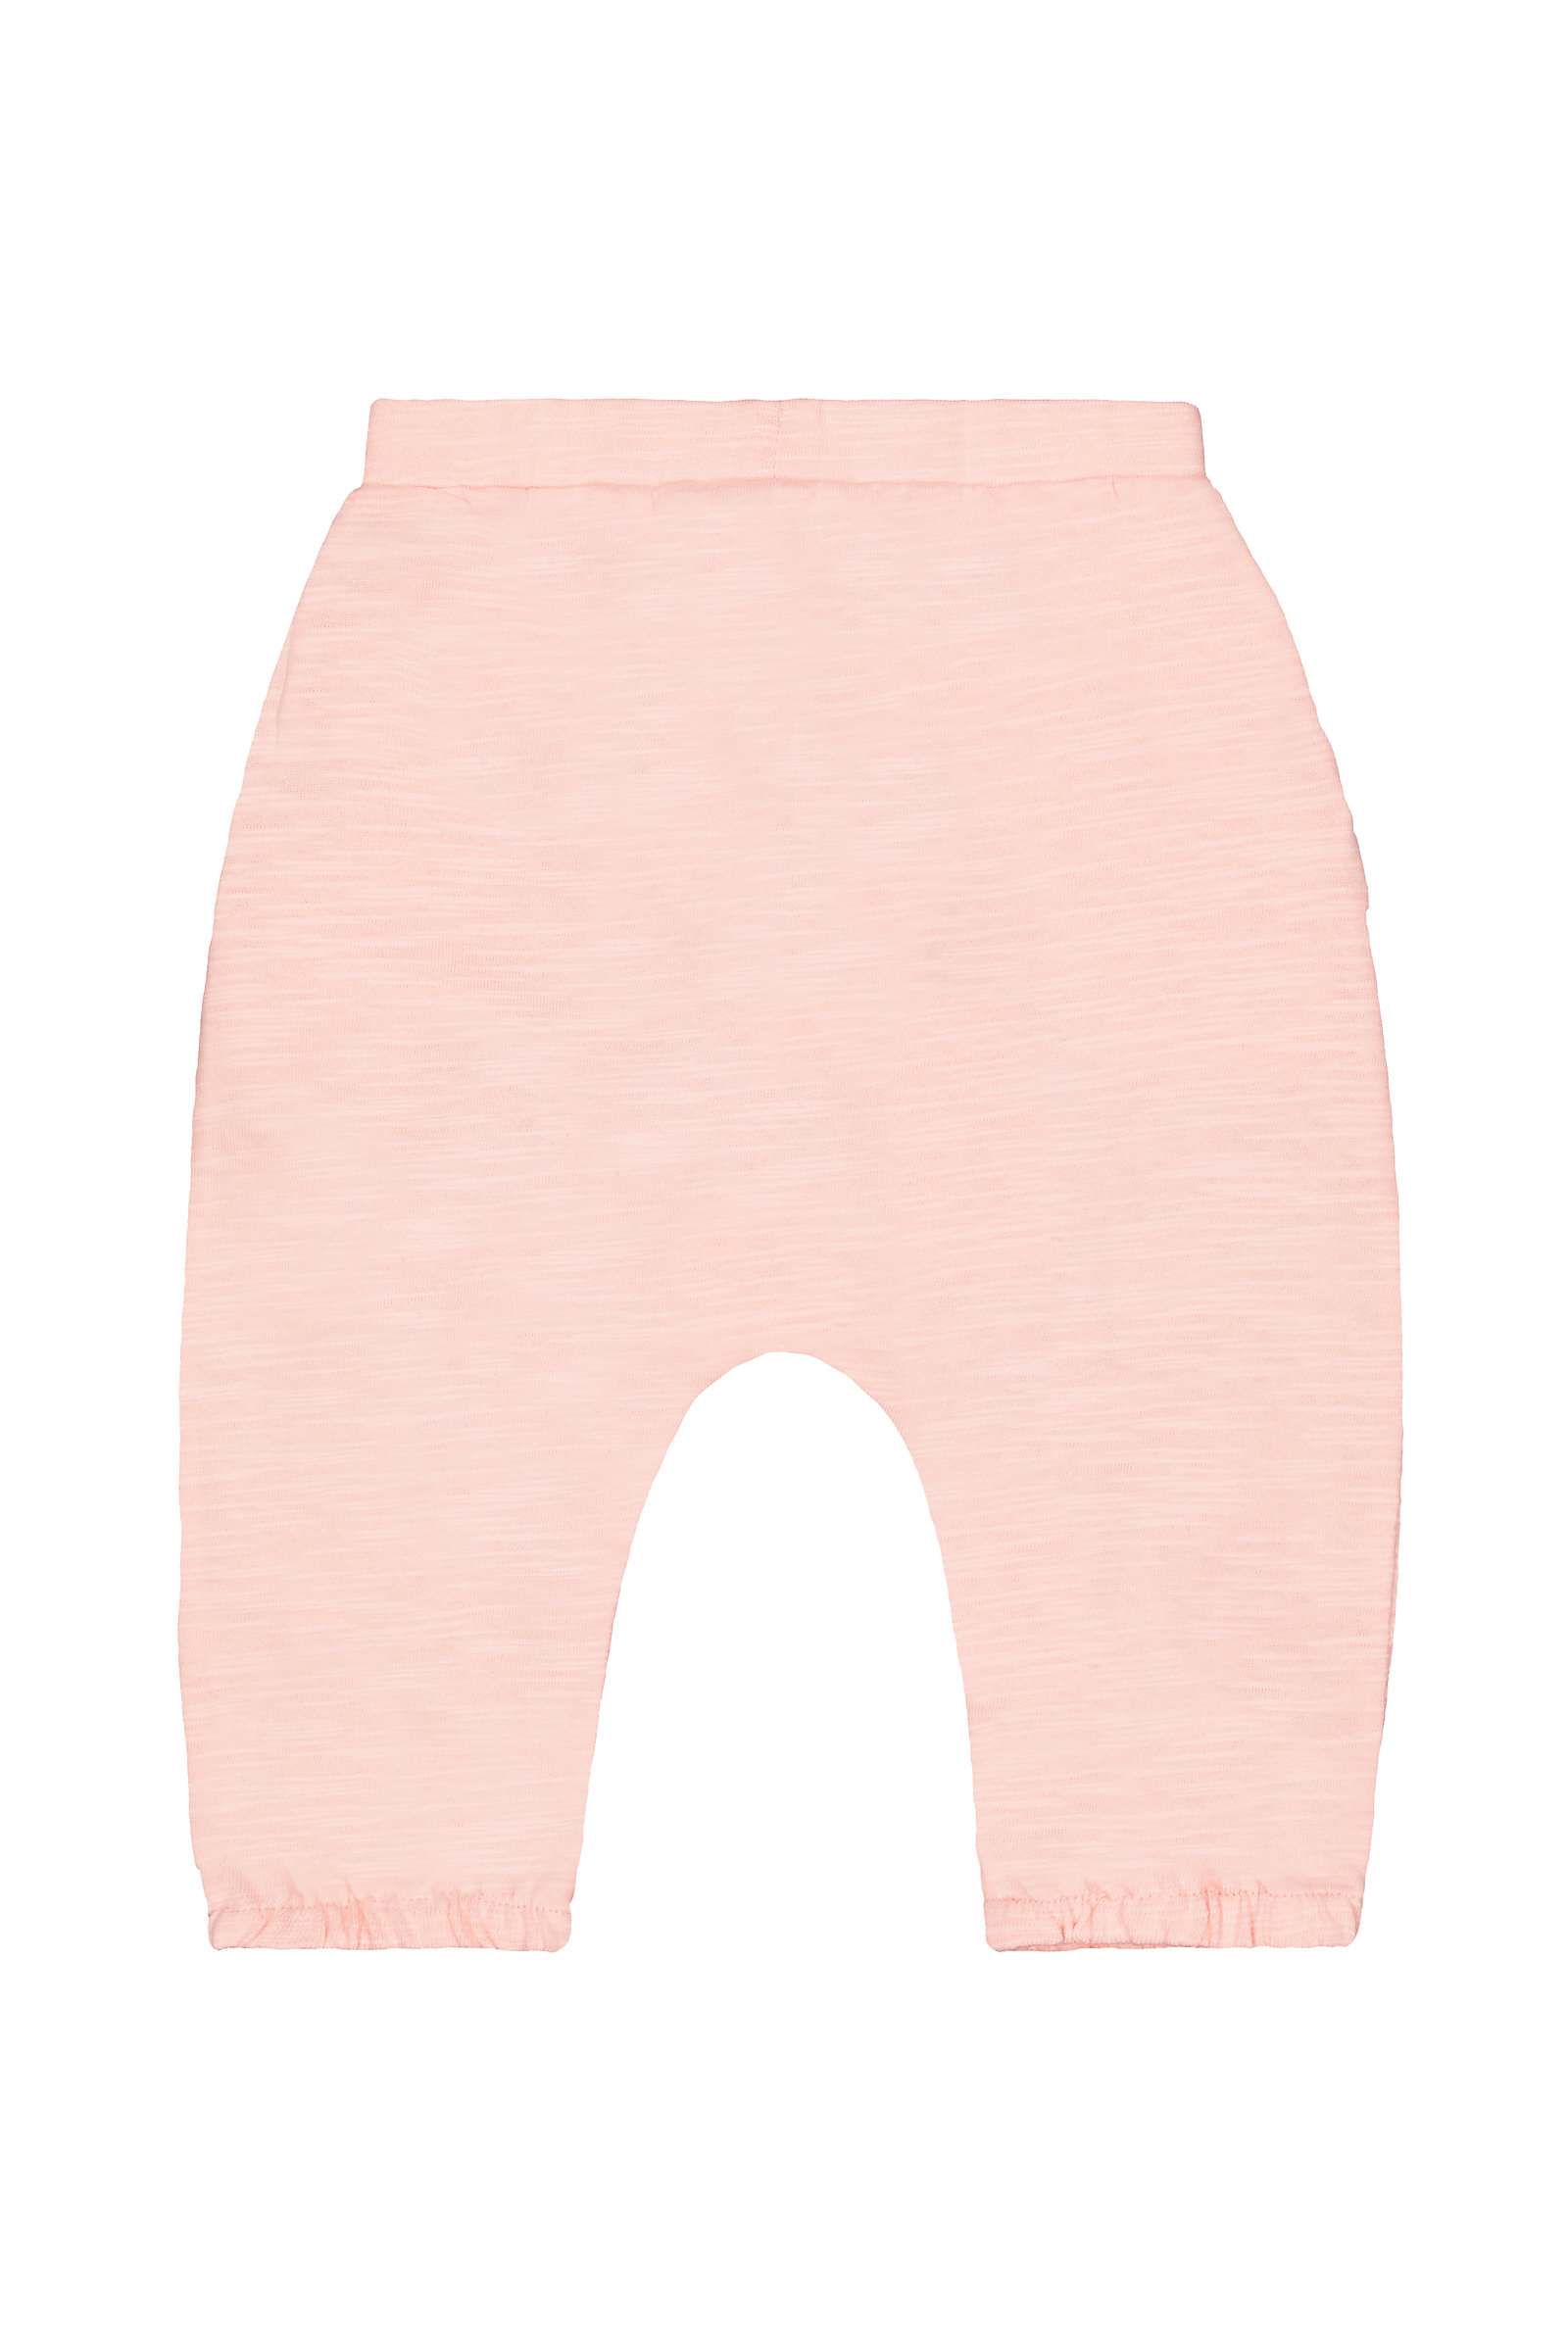 Mothercare Unisex Solid Pink Trousers